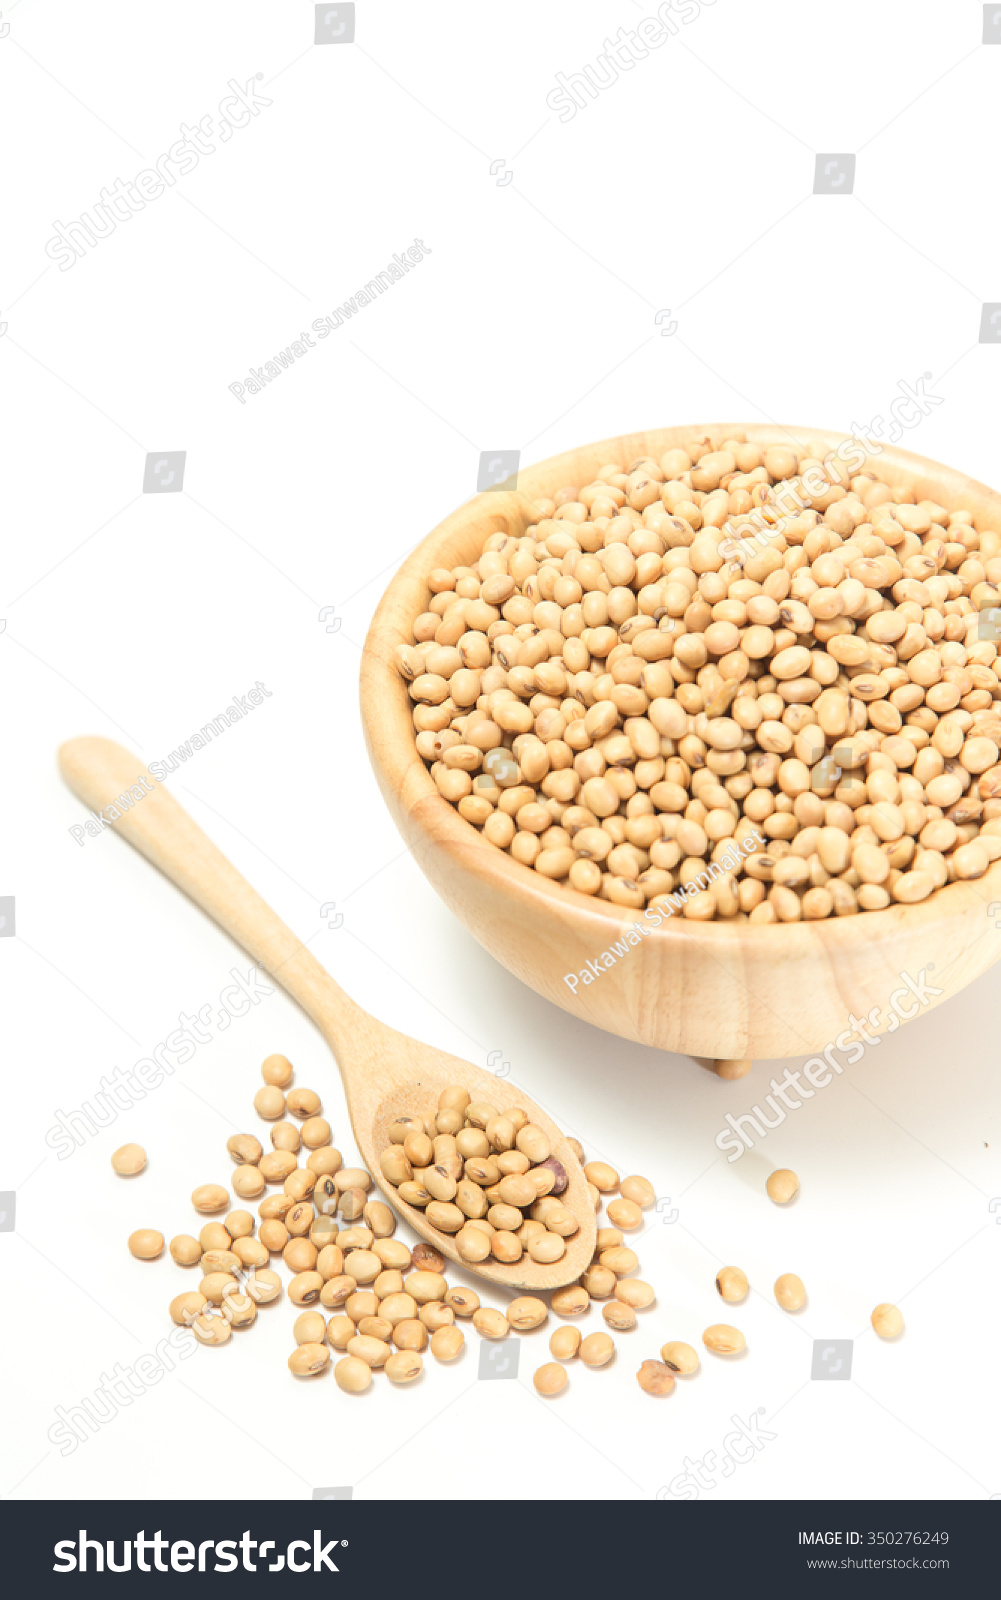 Soya beans in a wooden bowl and a wooden spoon, isolate on white background. #350276249